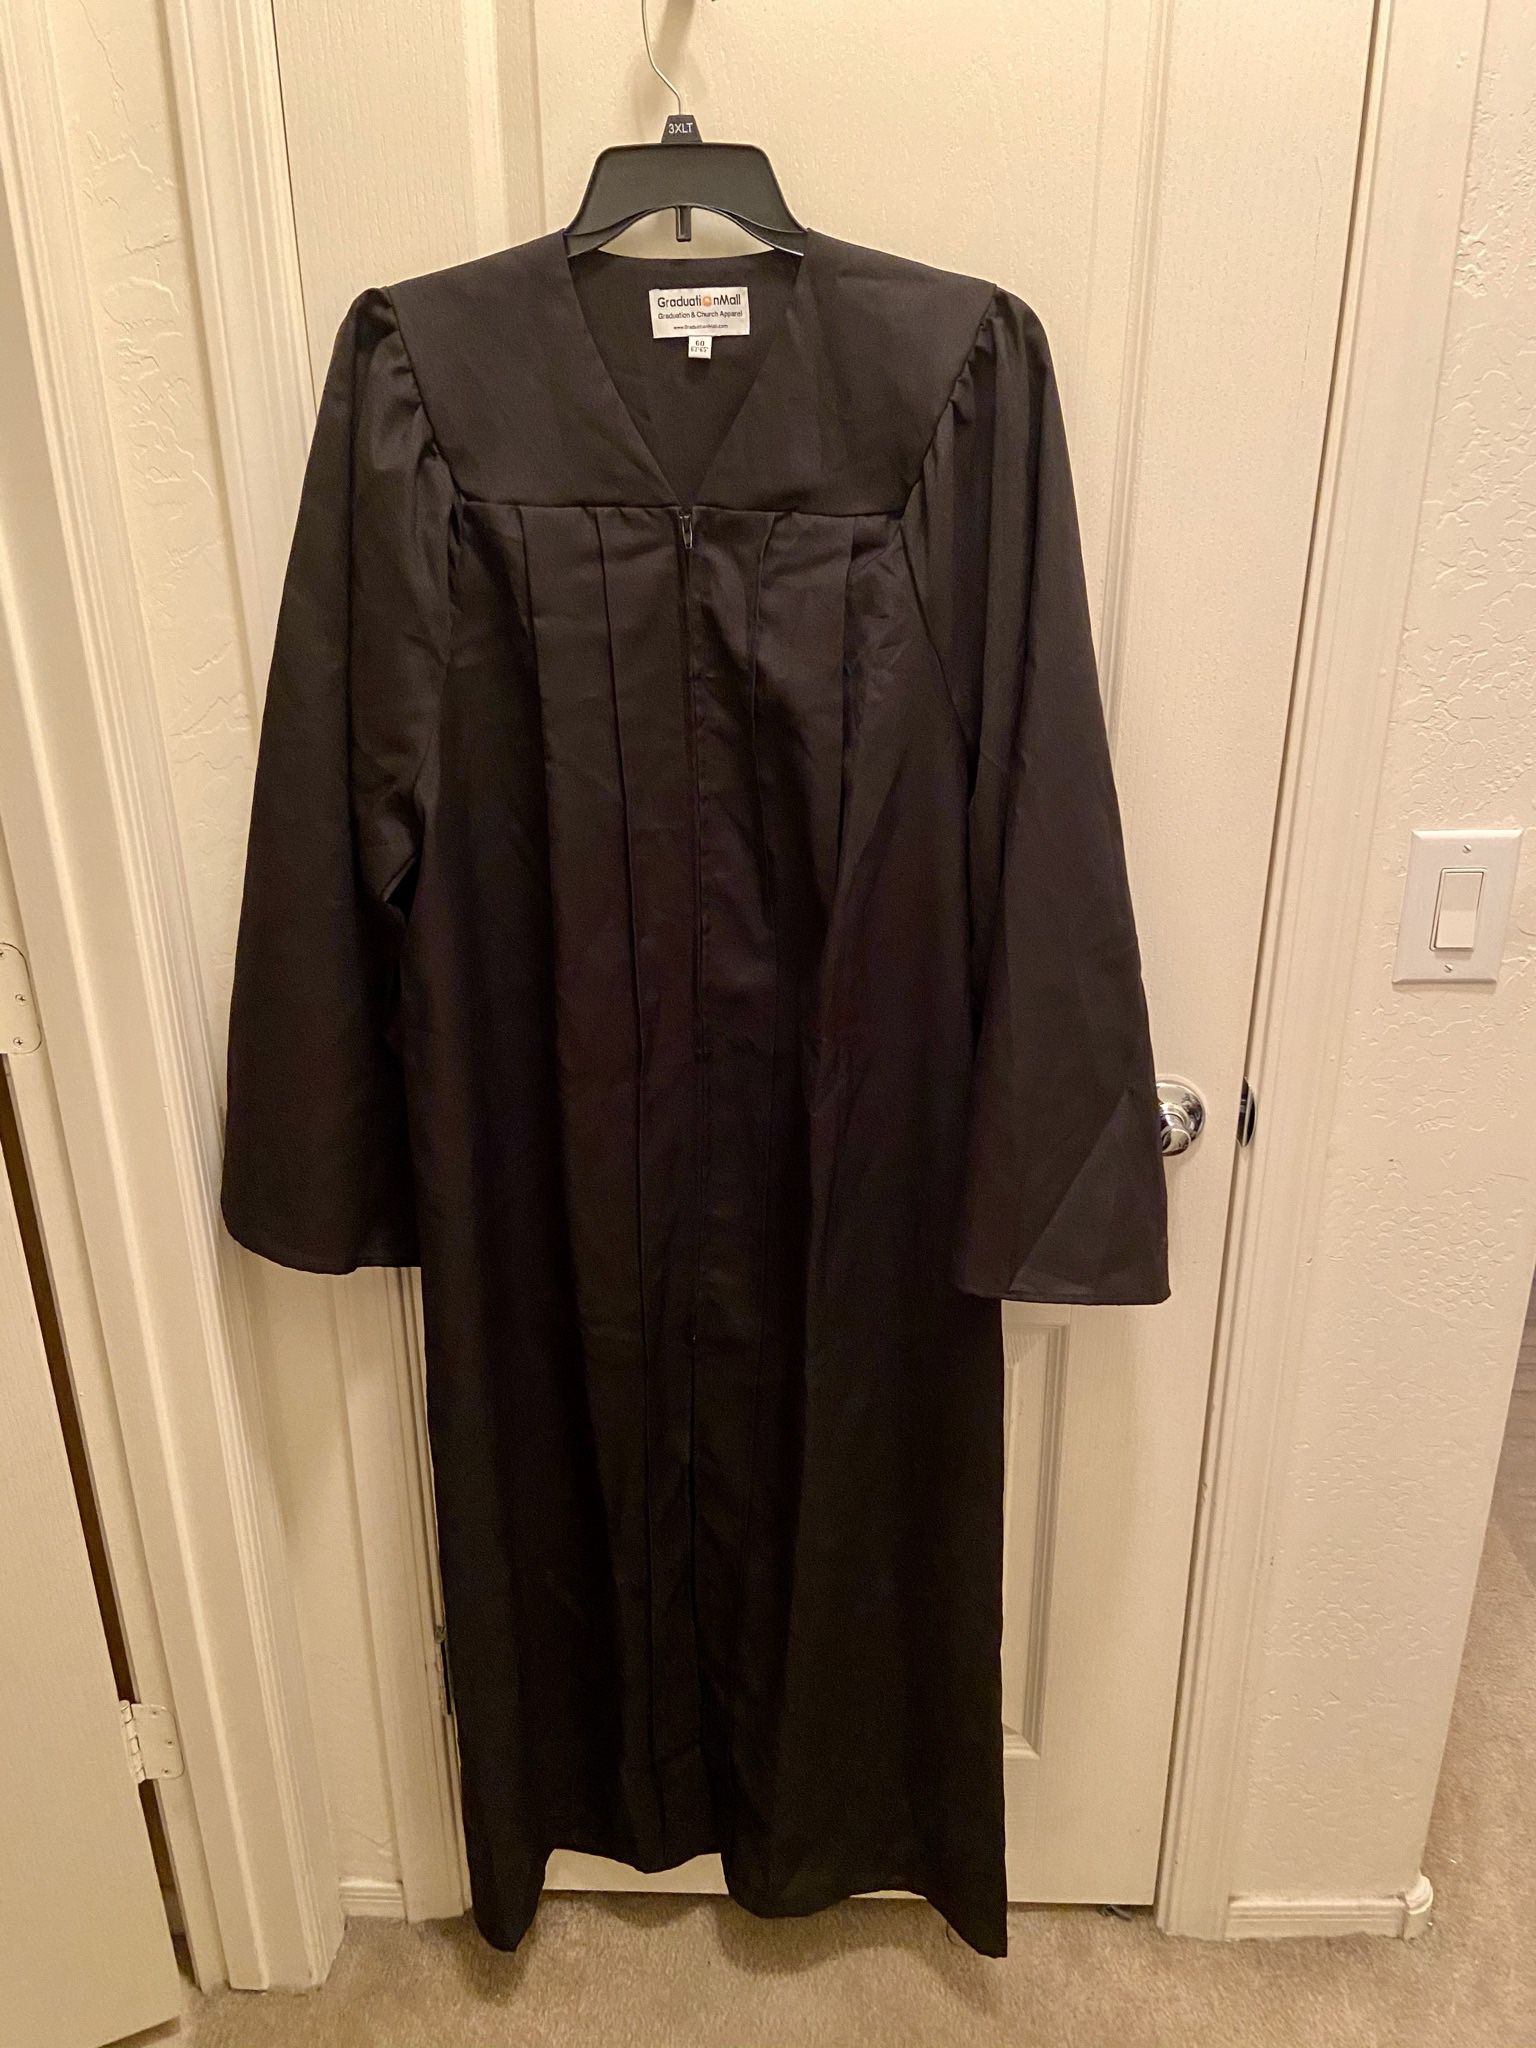 Black Graduate Graduation Gown Size 60 for someone 6 ft 3 to 6 ft 5 tall. Can also be used for Professor Snape Halloween costume